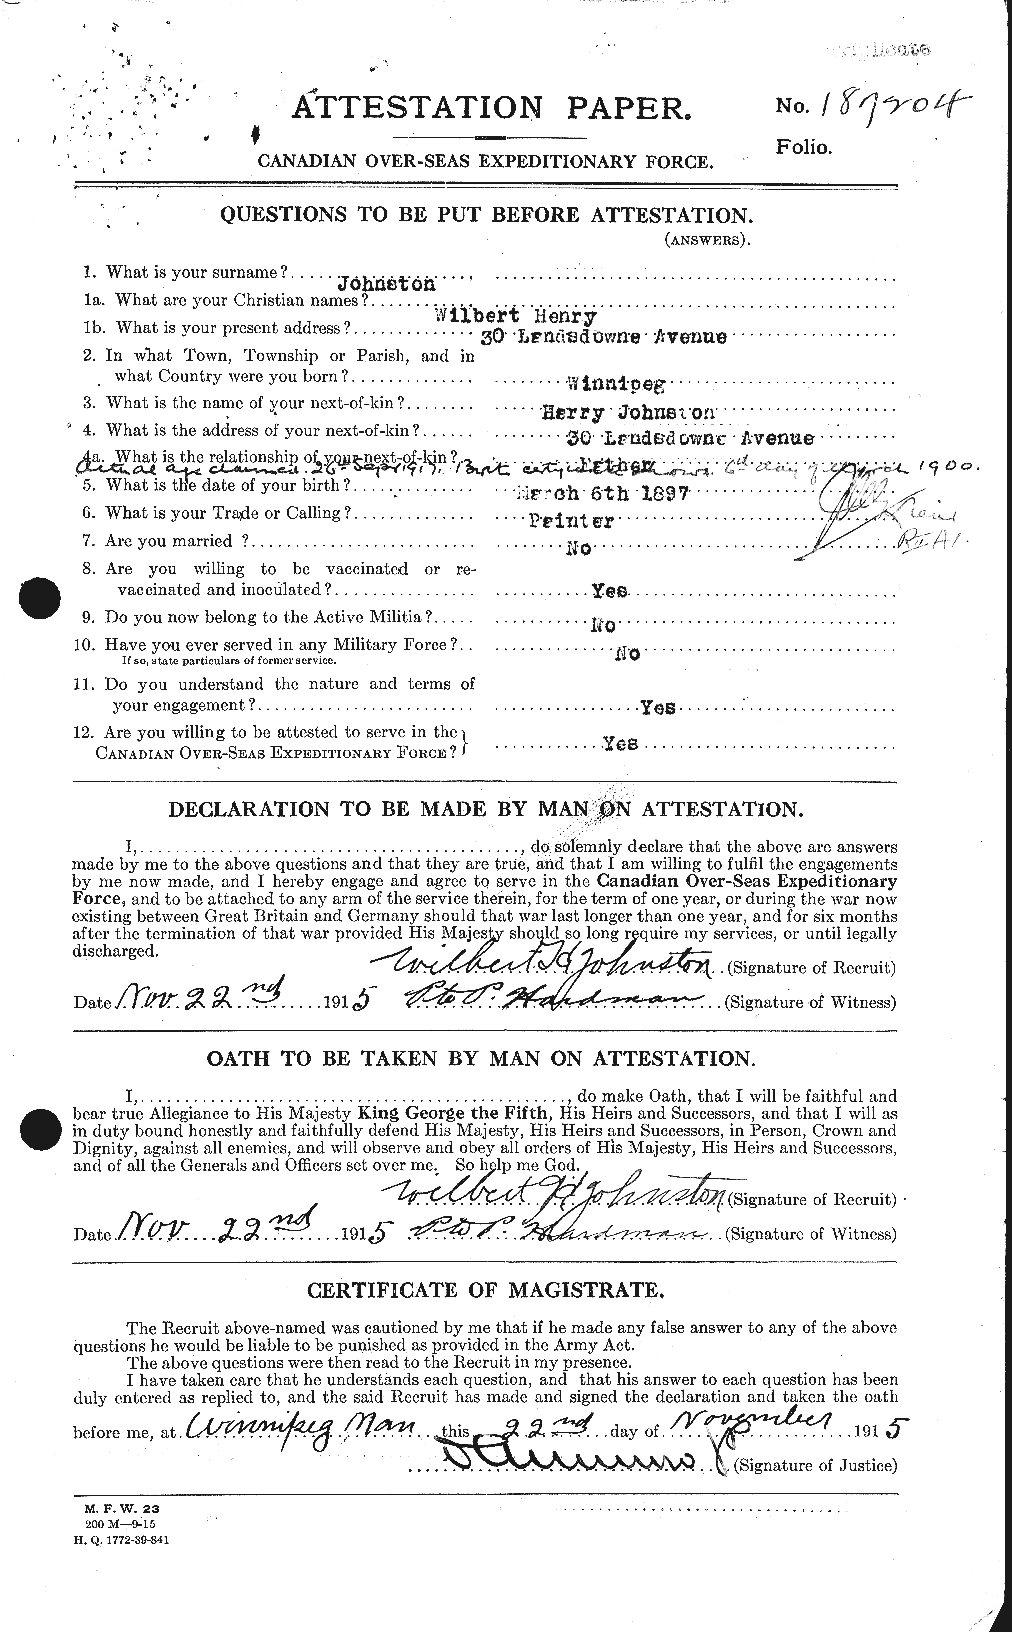 Personnel Records of the First World War - CEF 427217a